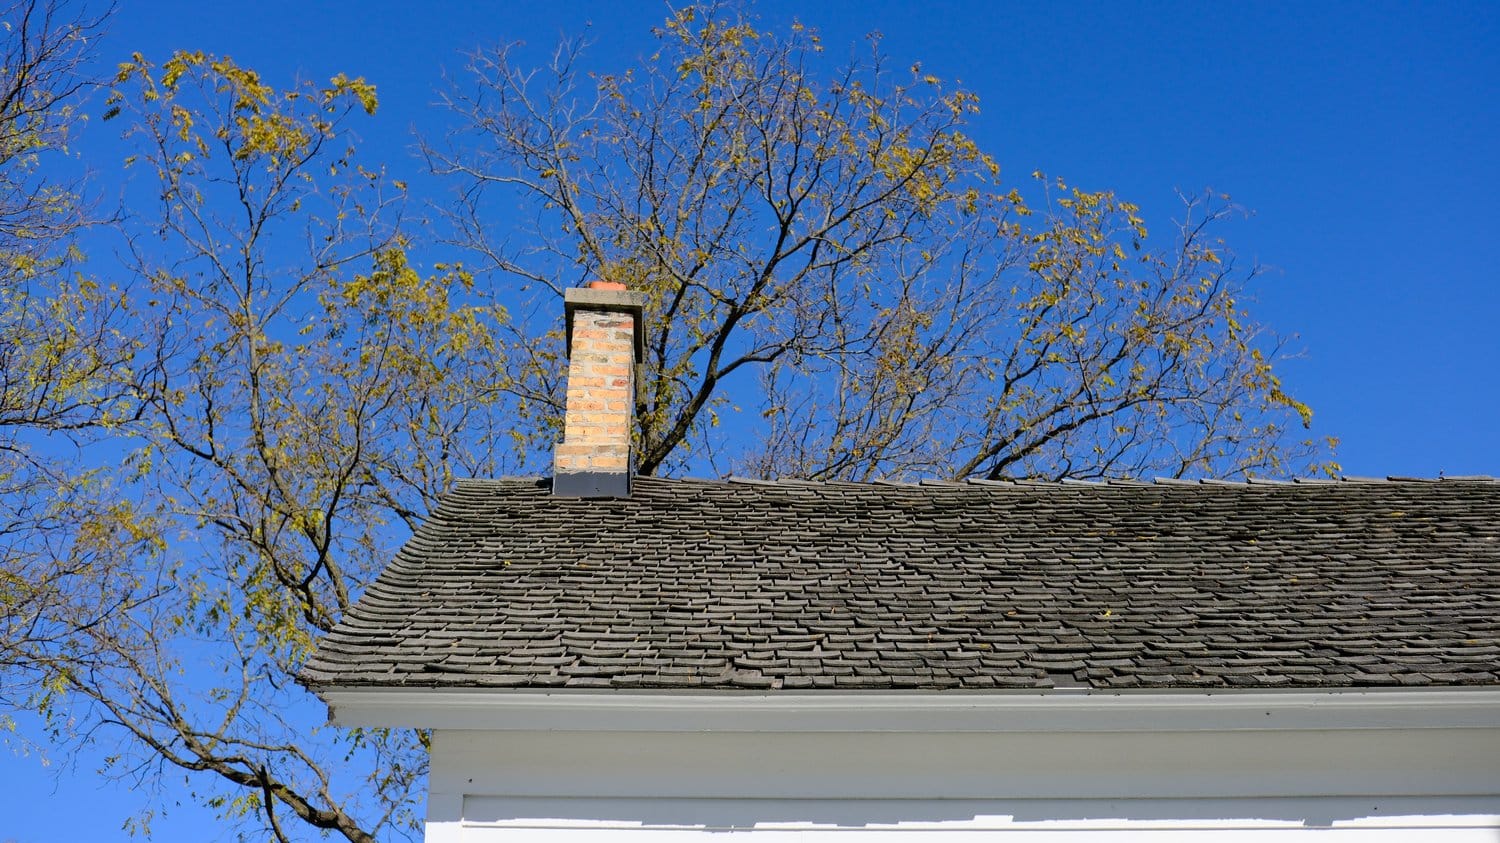 Chimney and roof of Perkins Hall.